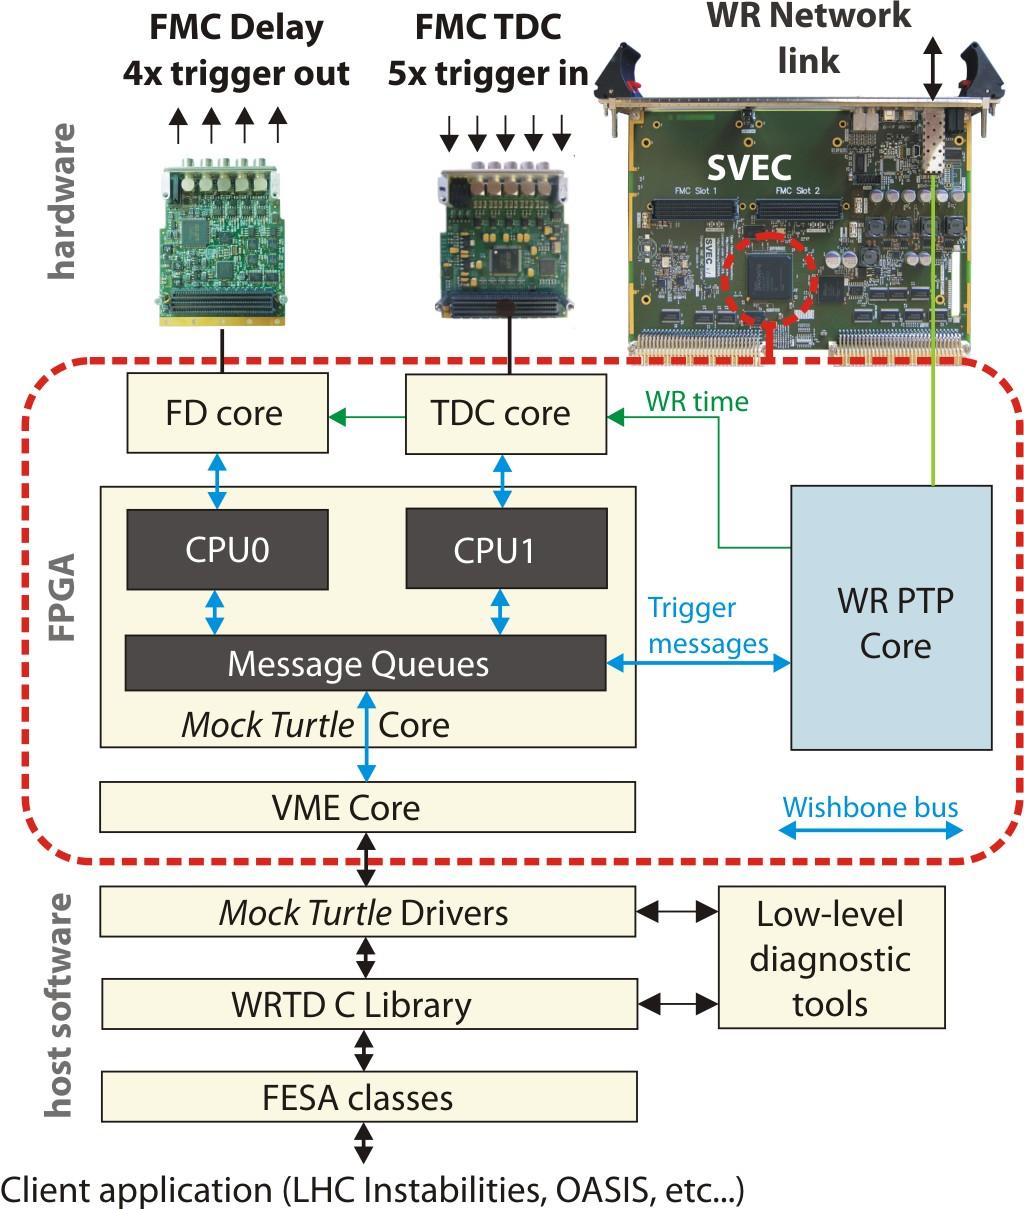 Trigger Distribution Implementation Based on the CERN FMC Kit 6 SVEC Carrier (VME64x) Input: FMC TDC Outputs: FMC Fine Delay FPGA: the Mock Turtle core Based on deterministic CPU cores One core takes